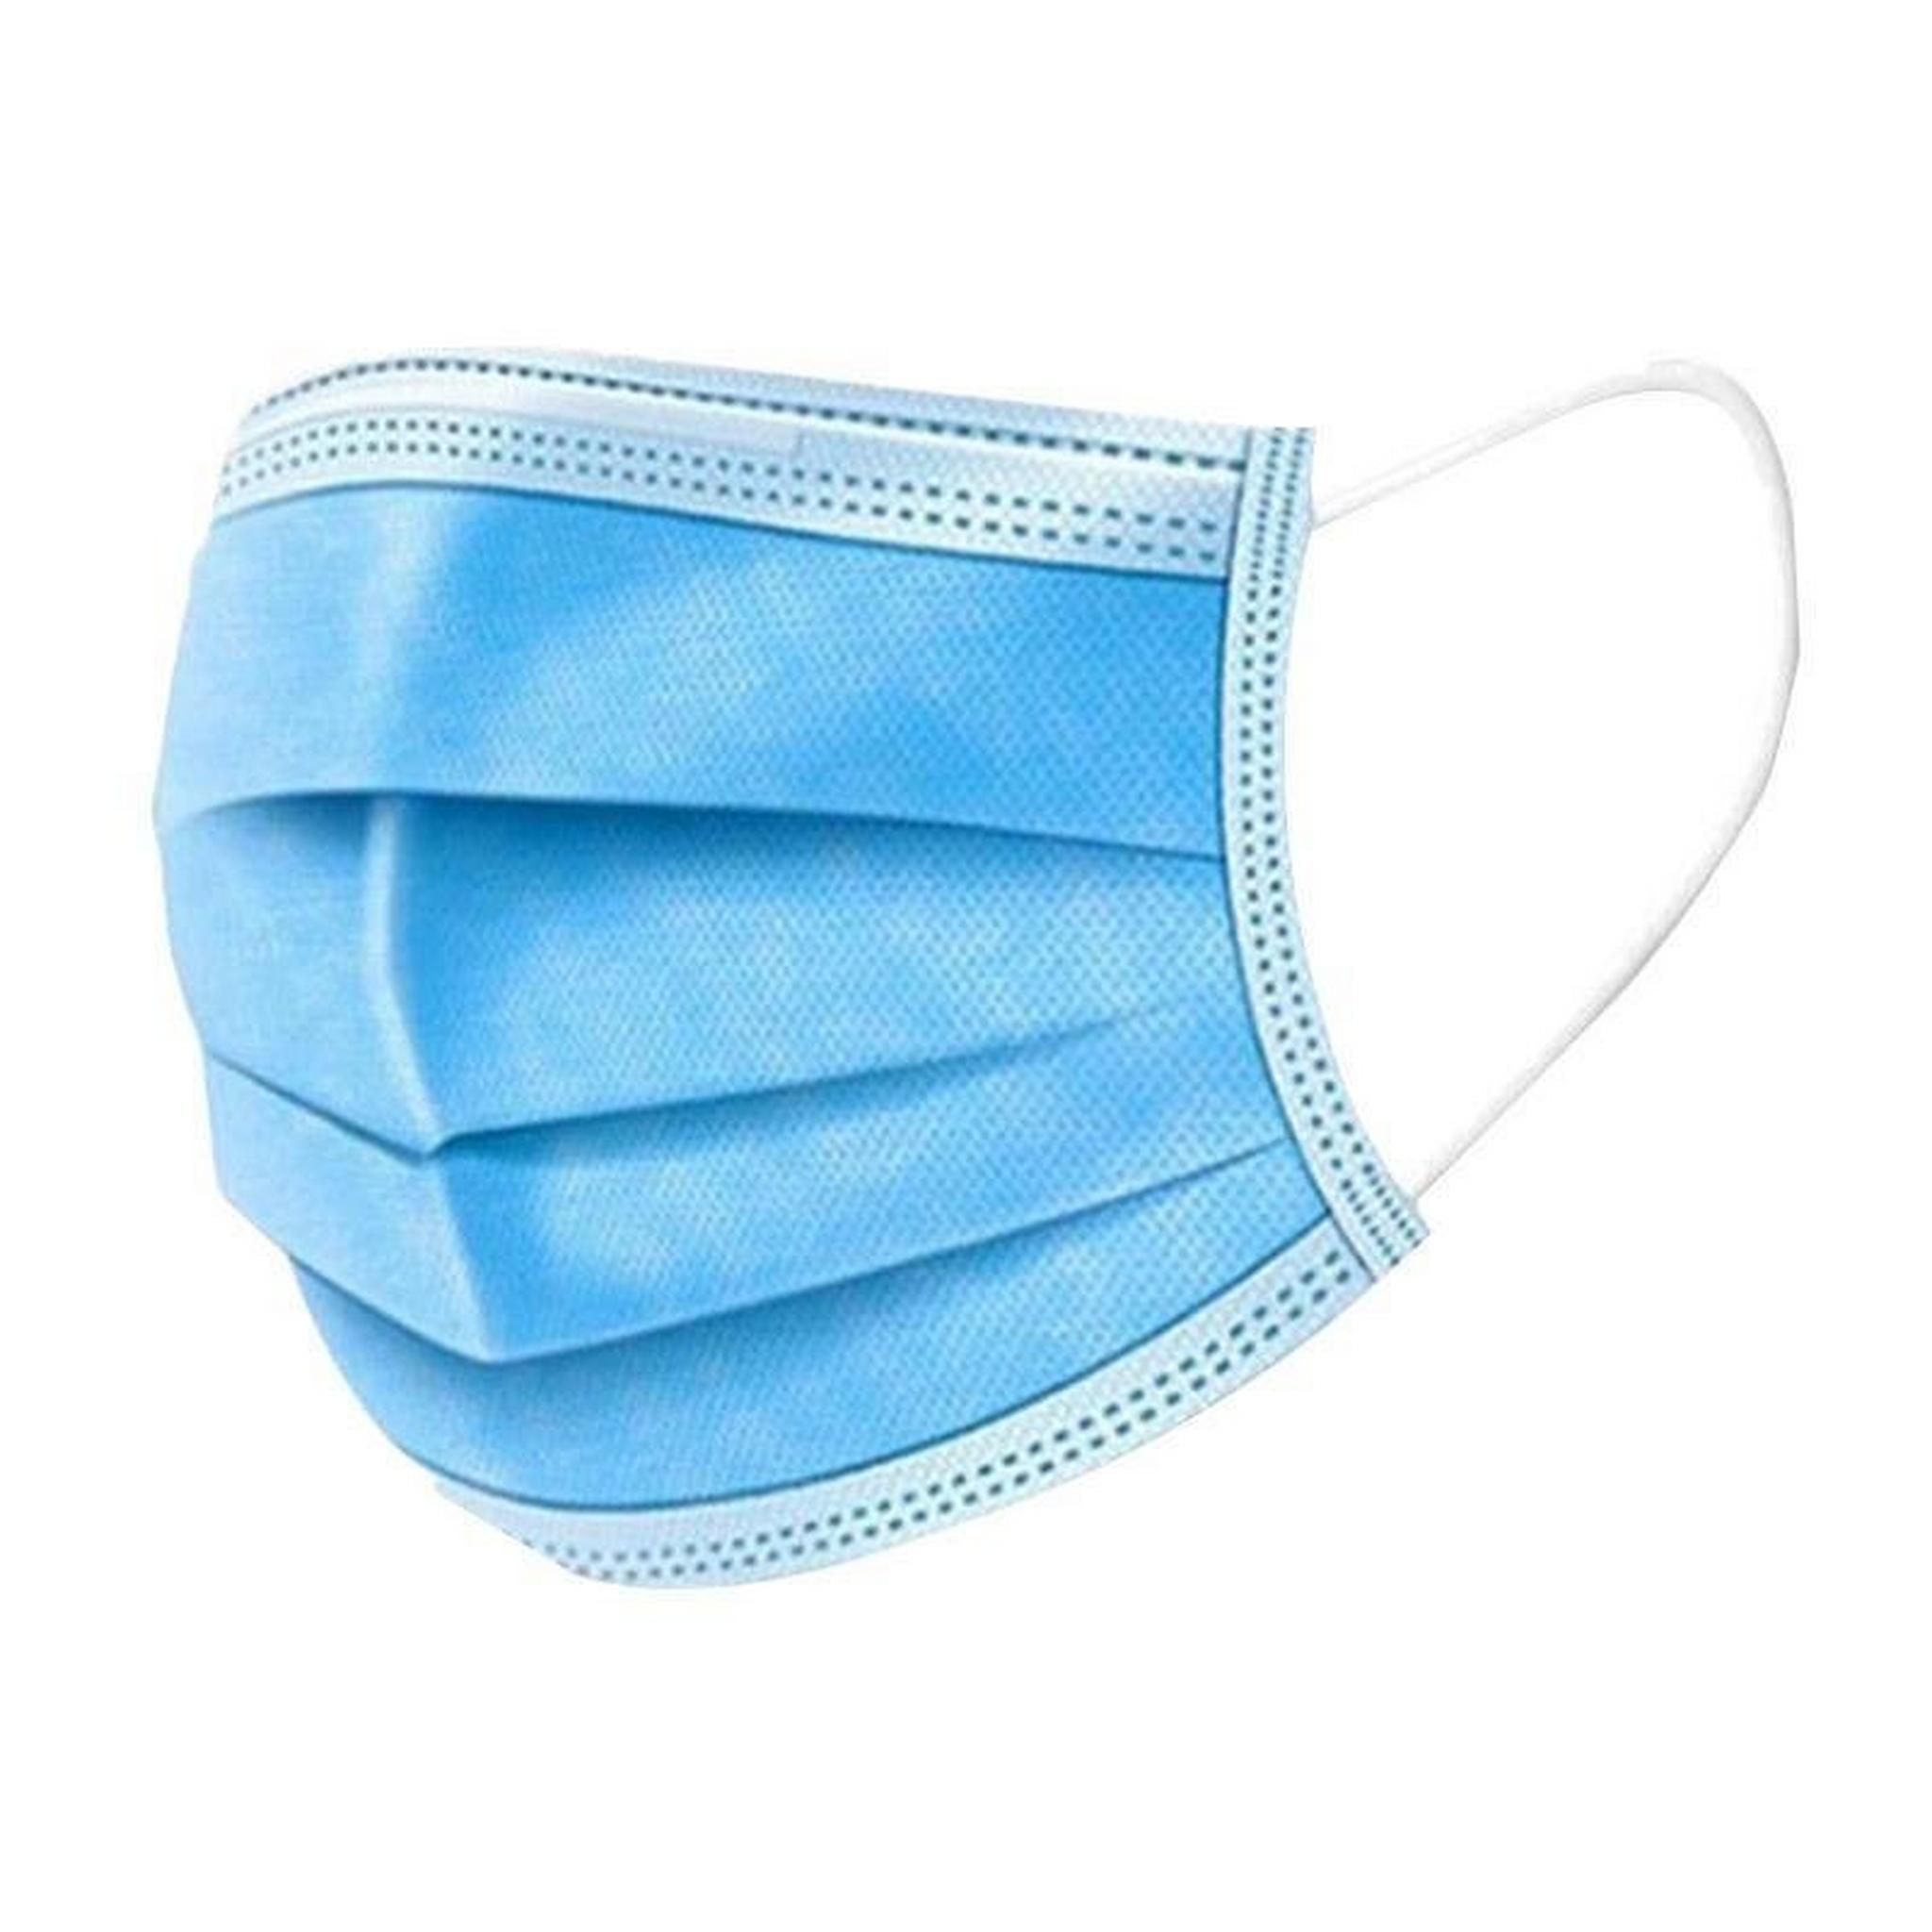 3 - Layer Disposable Protective Face Mask - 50 Pieces